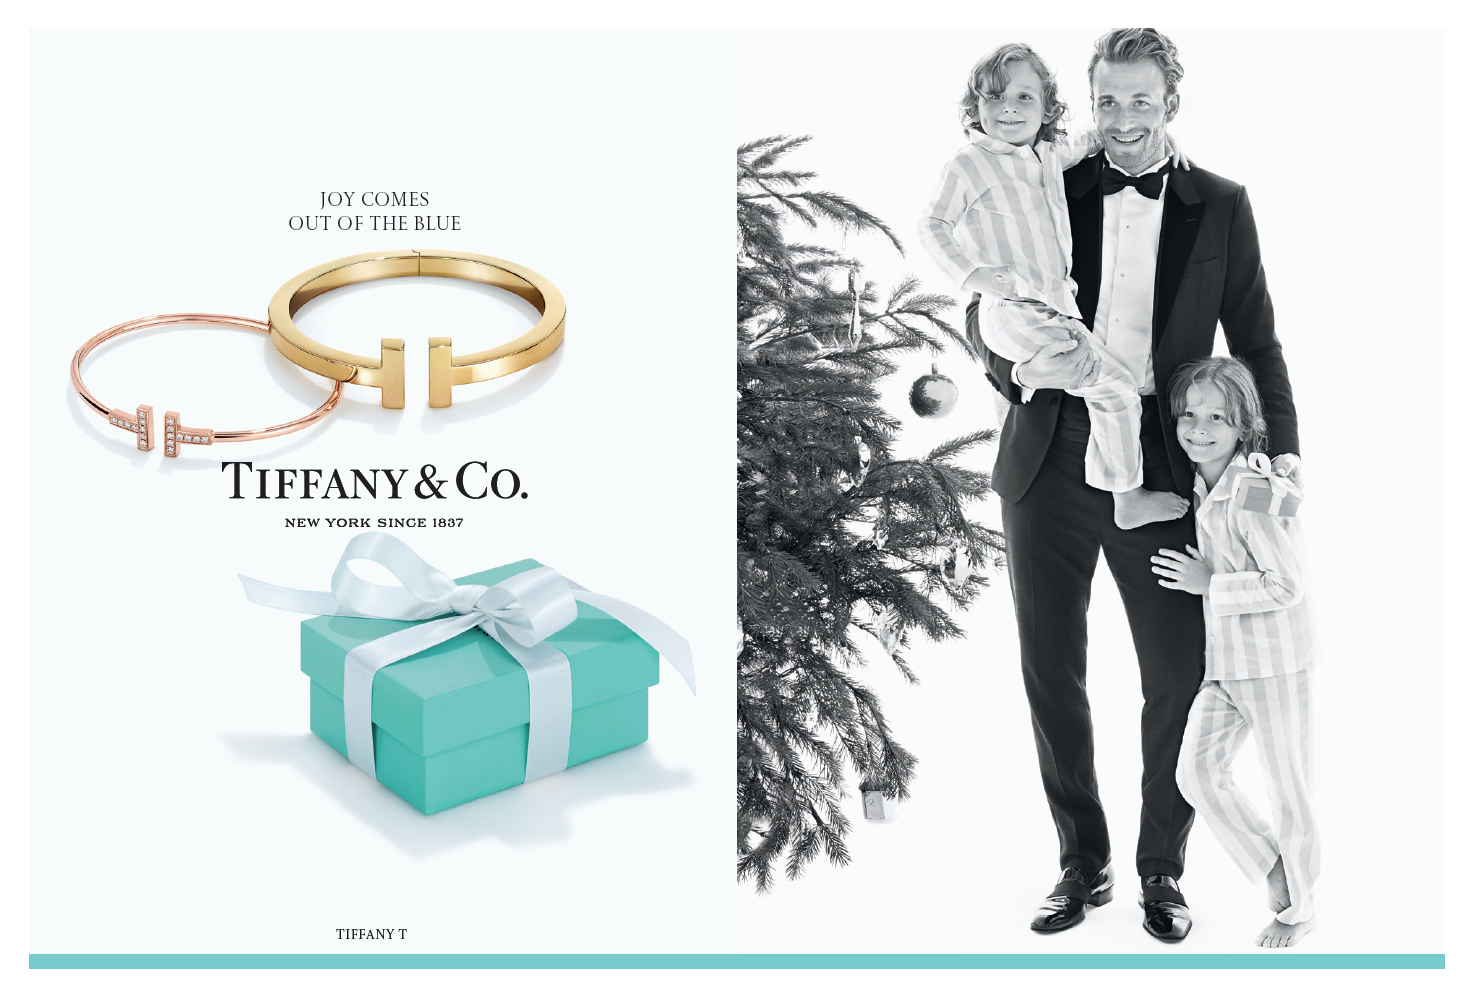 Tiffany Blue Box takes pride of place in Mother's Day campaign